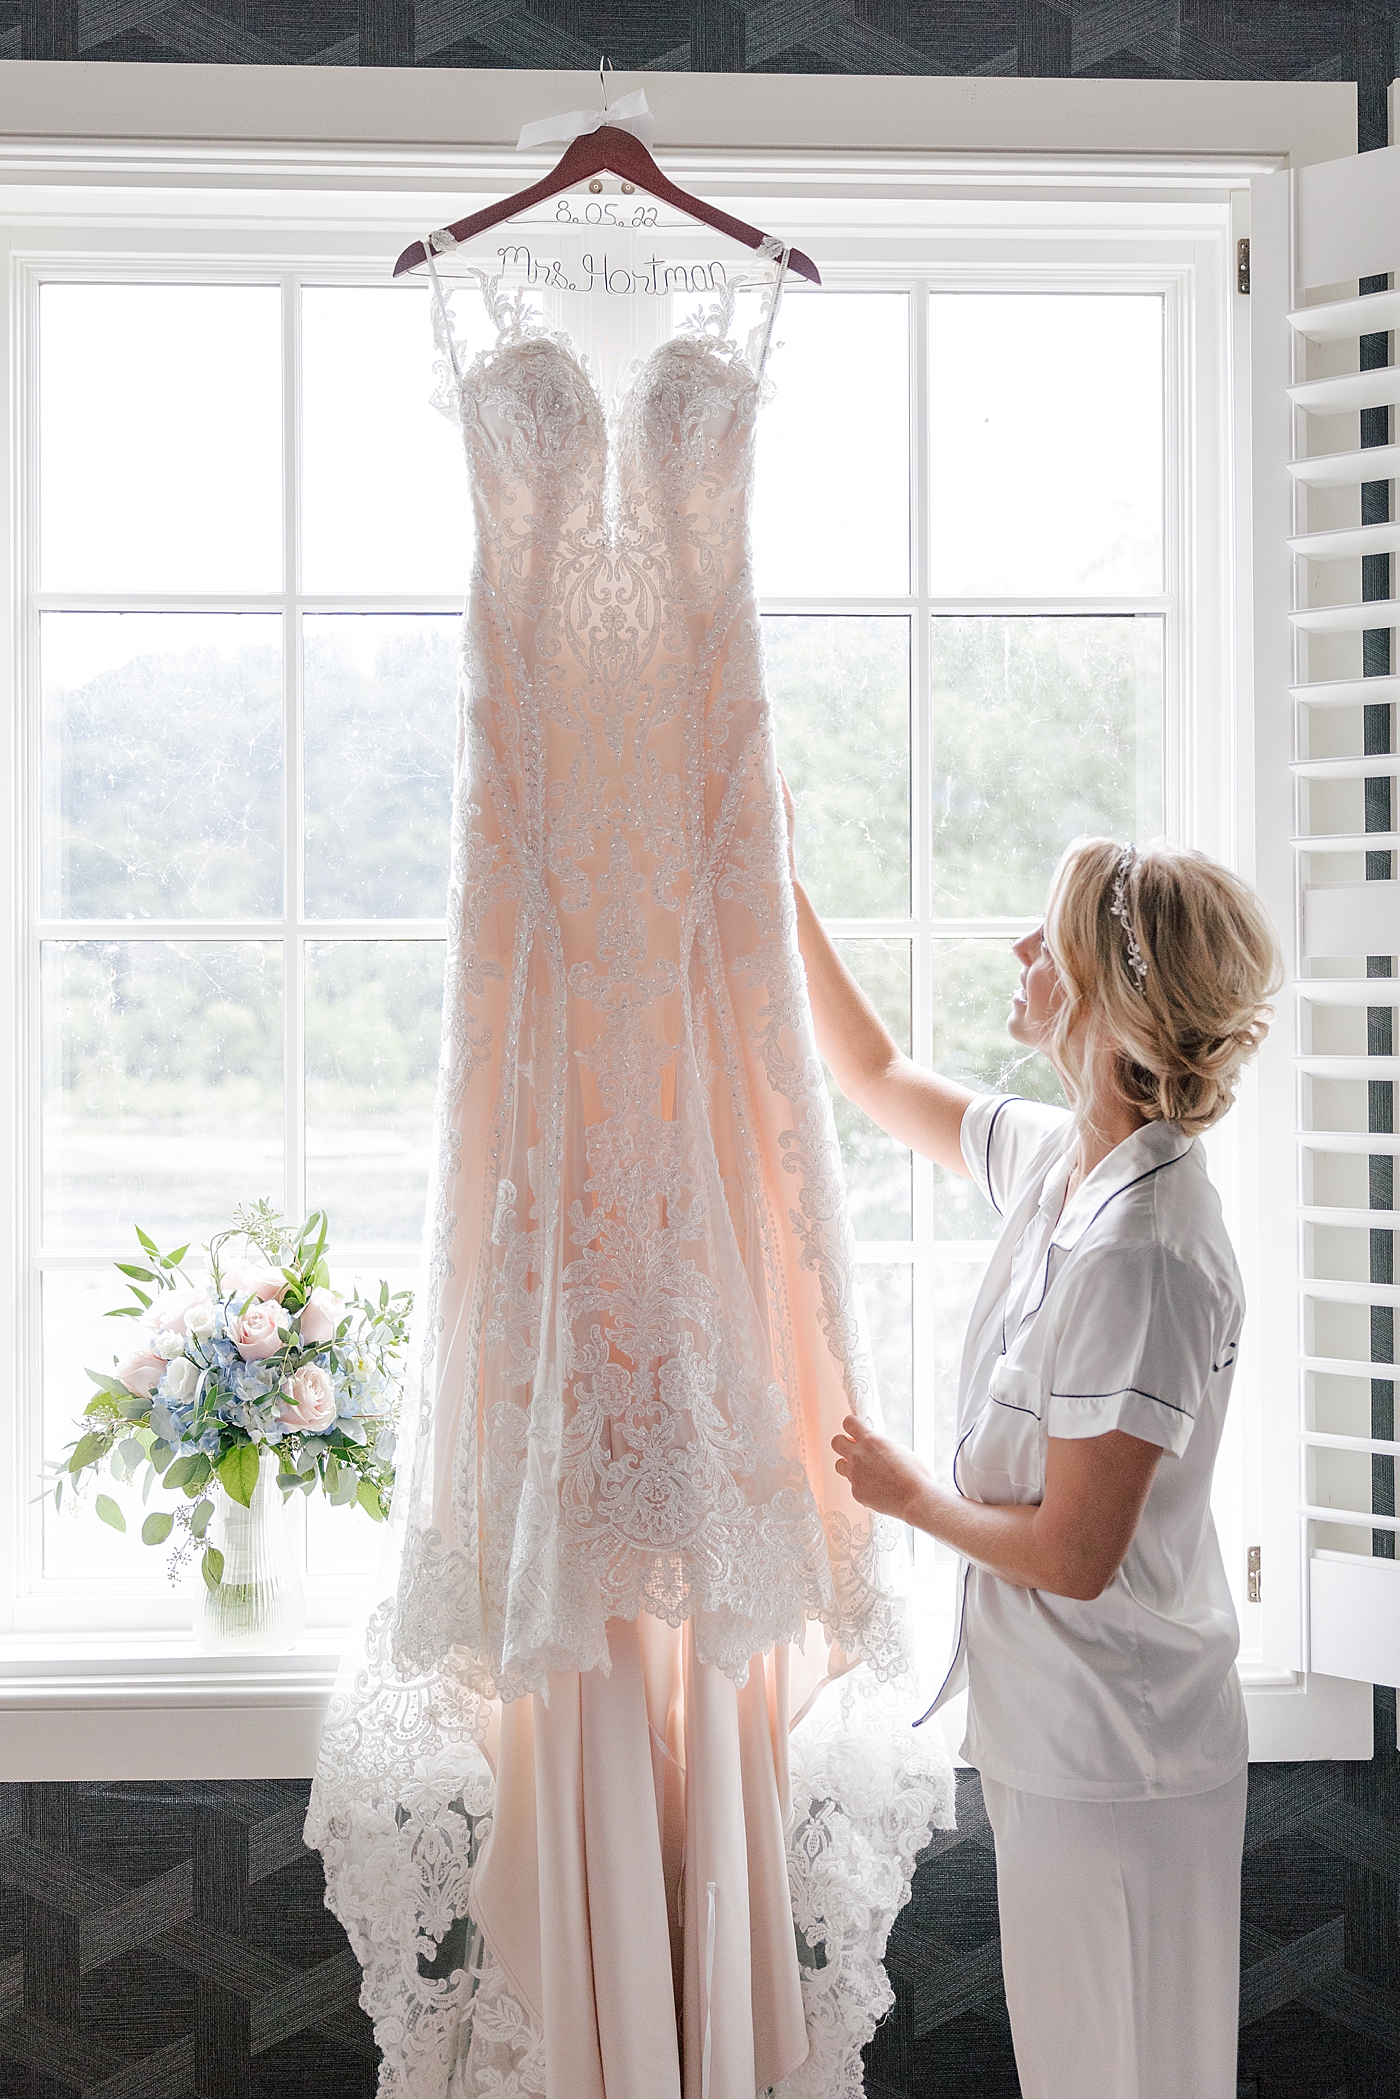 Bride adjusting her gown on a hanger during River House Odette's Wedding | Image by Hope Helmuth Photography